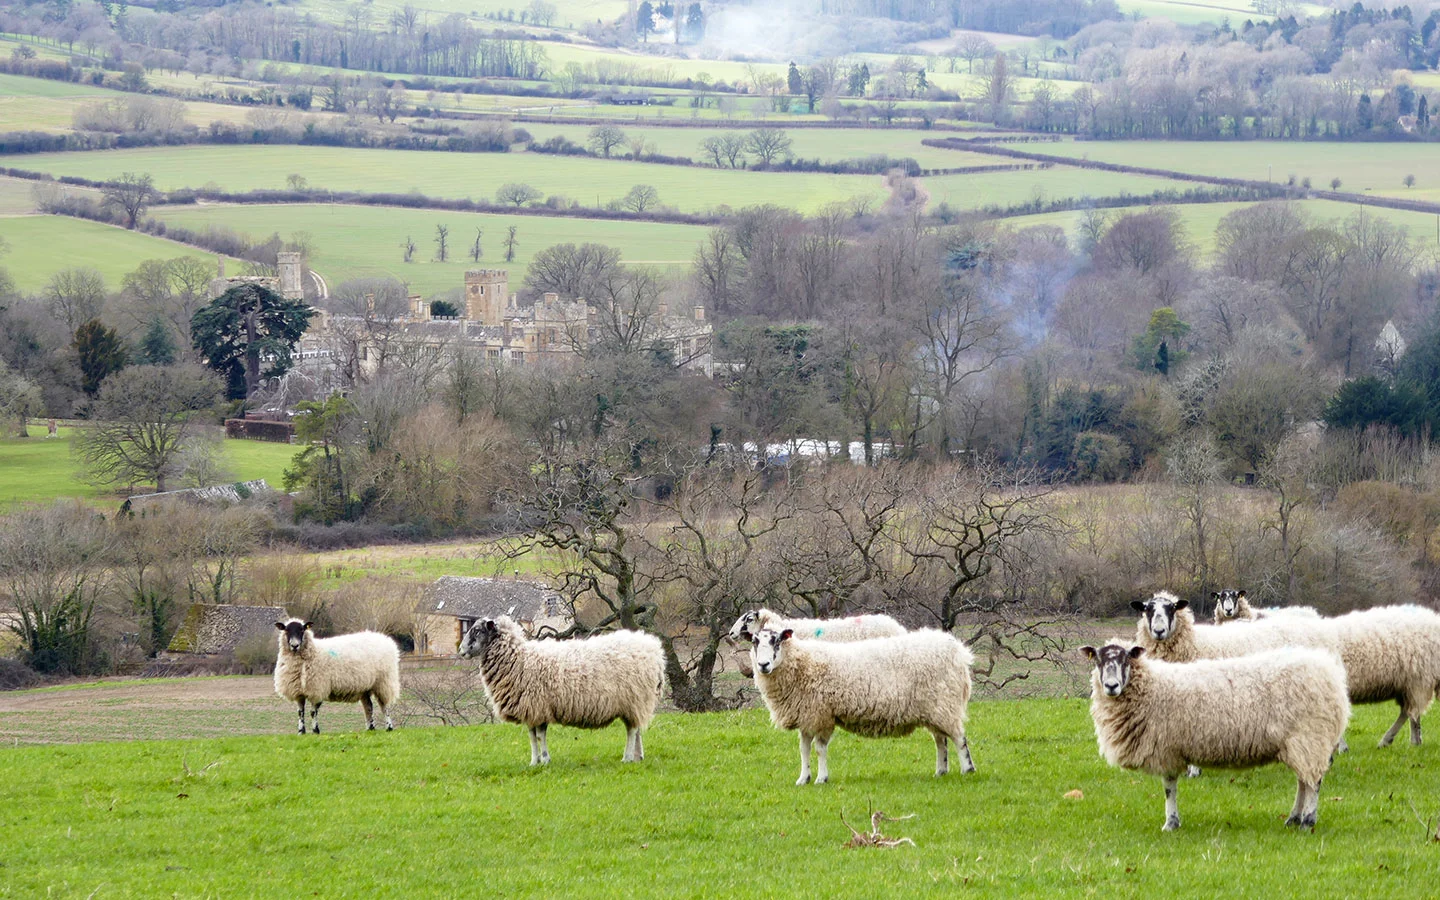 Views of Sudeley Castle with sheep from Dunn's Hill